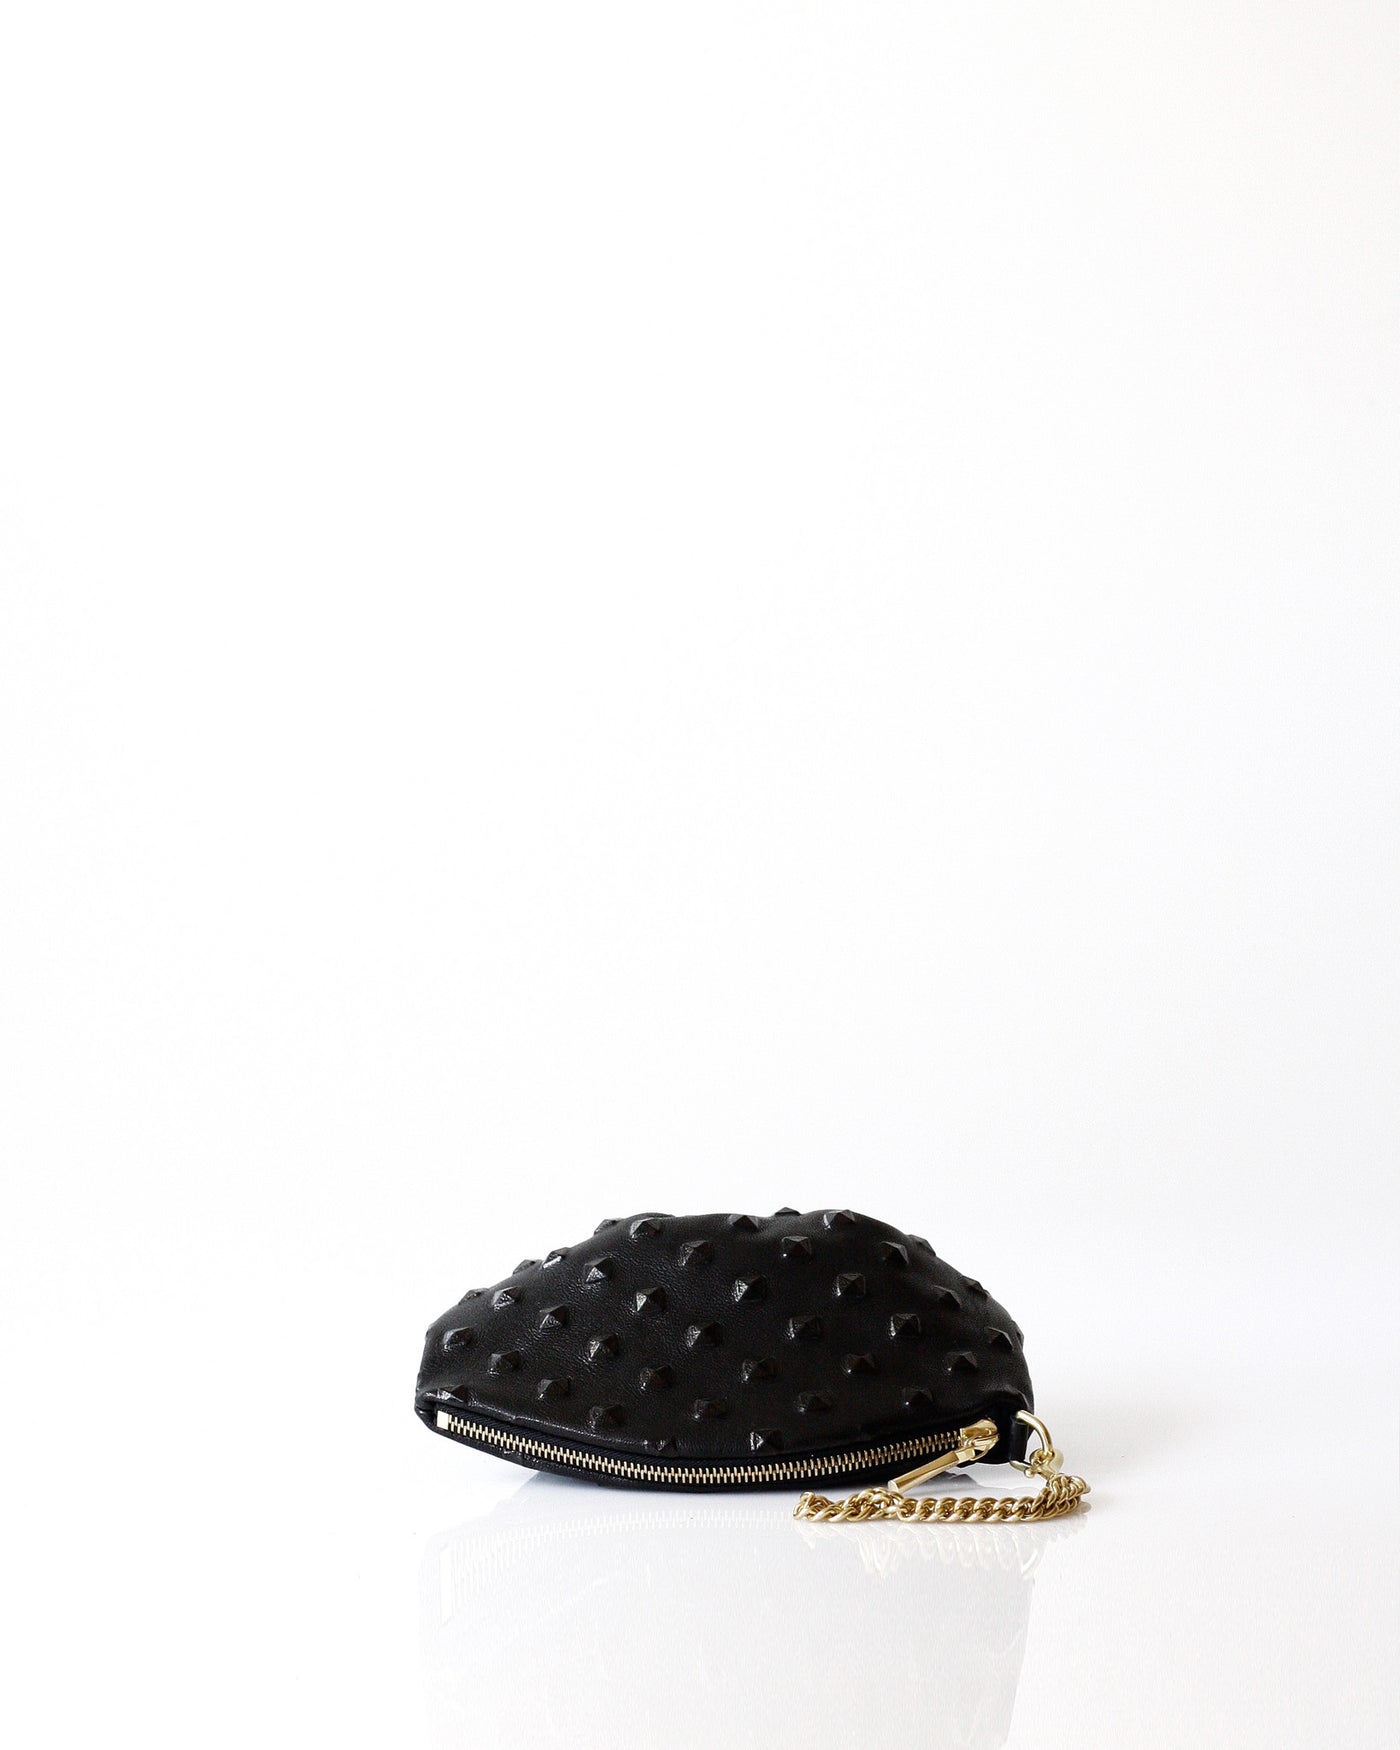 m Pochette | BLK Studded - Opelle bag Permanent Collection - Opelle leather handbag handcrafted leather bag toronto Canada